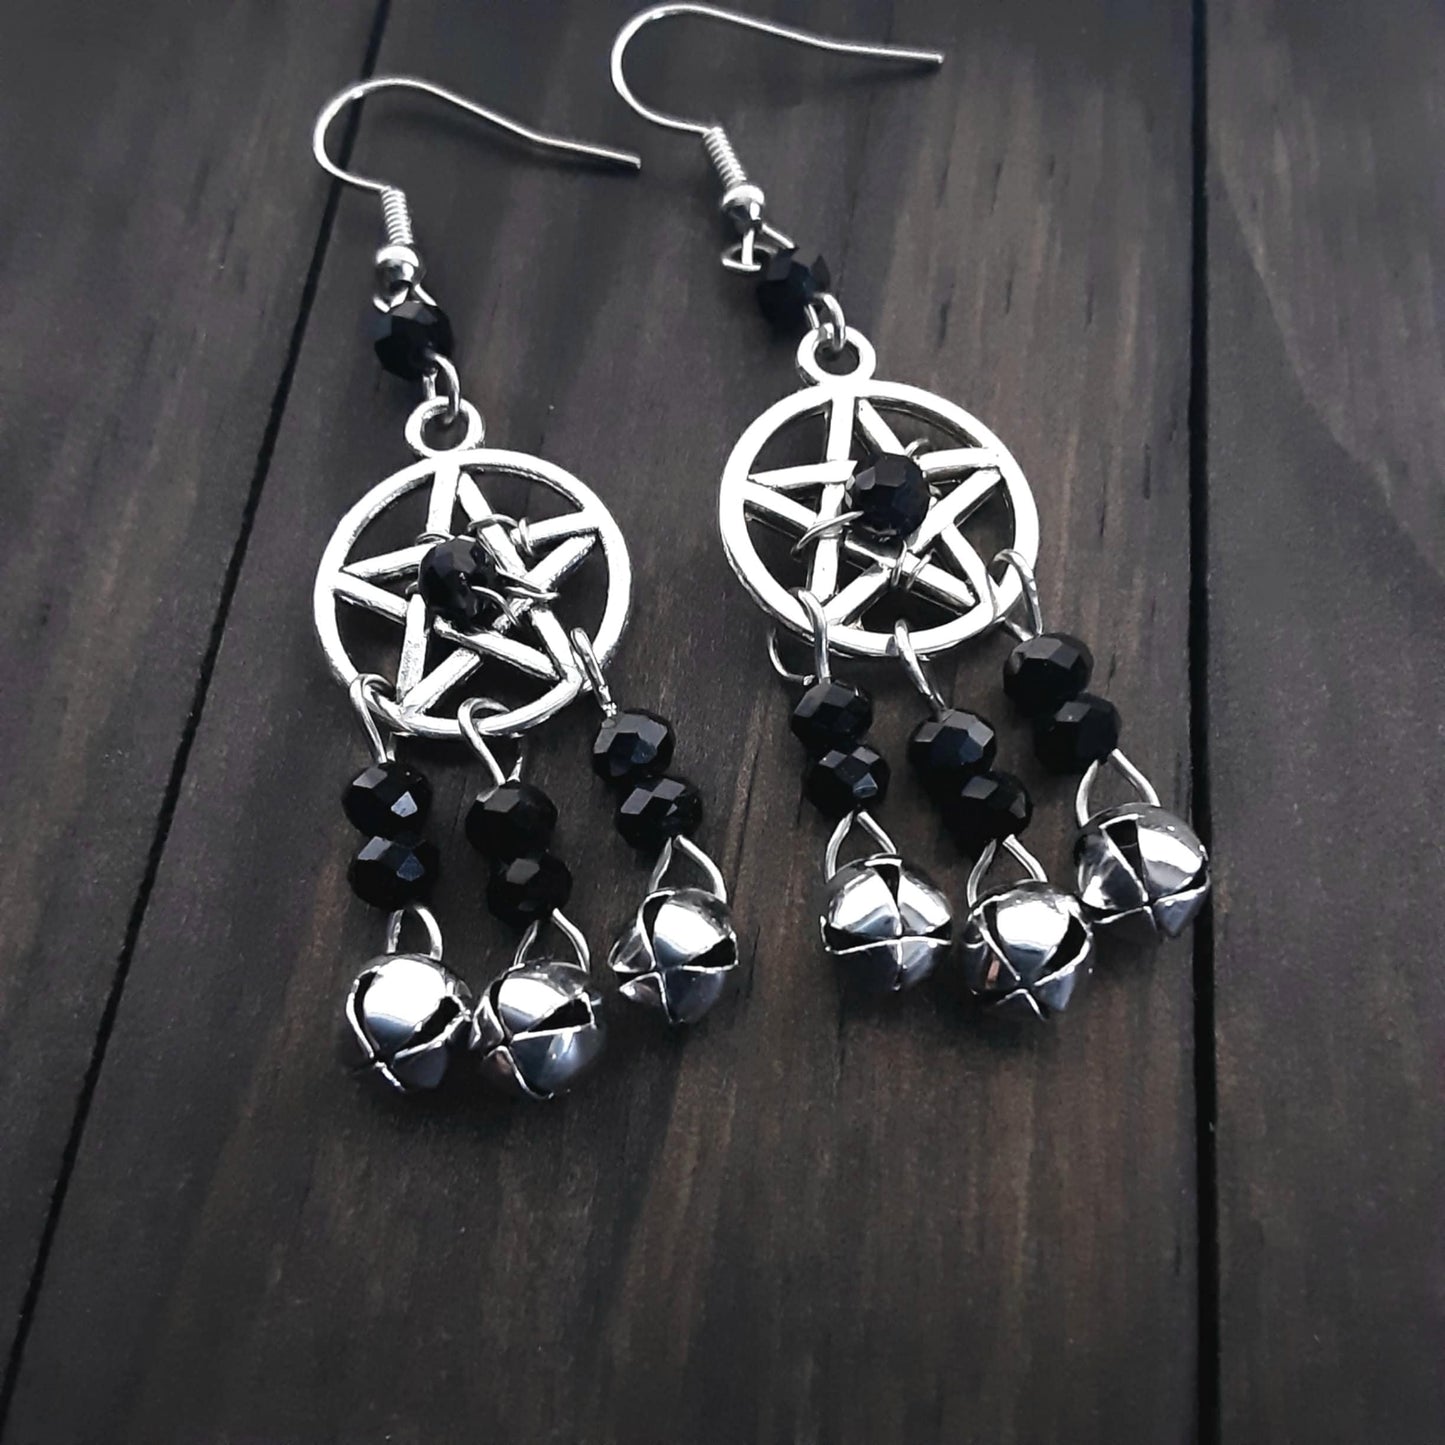 Pentacle earrings with black crystals and bells on wooden background